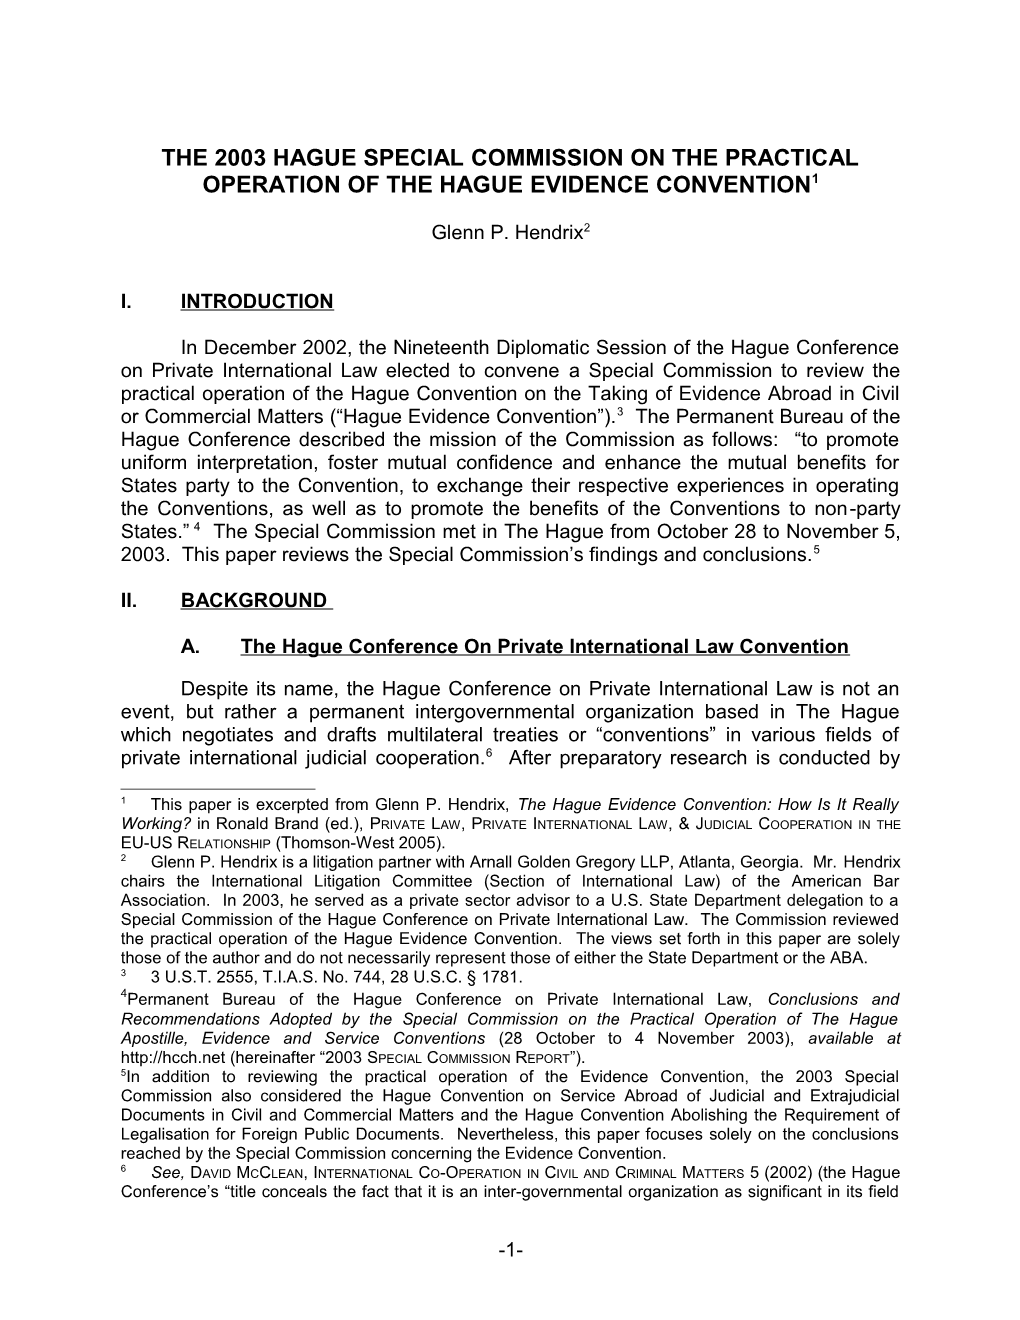 The 2003 Hague Special Commission on the Practical Operation of the Hague Evidence Convention